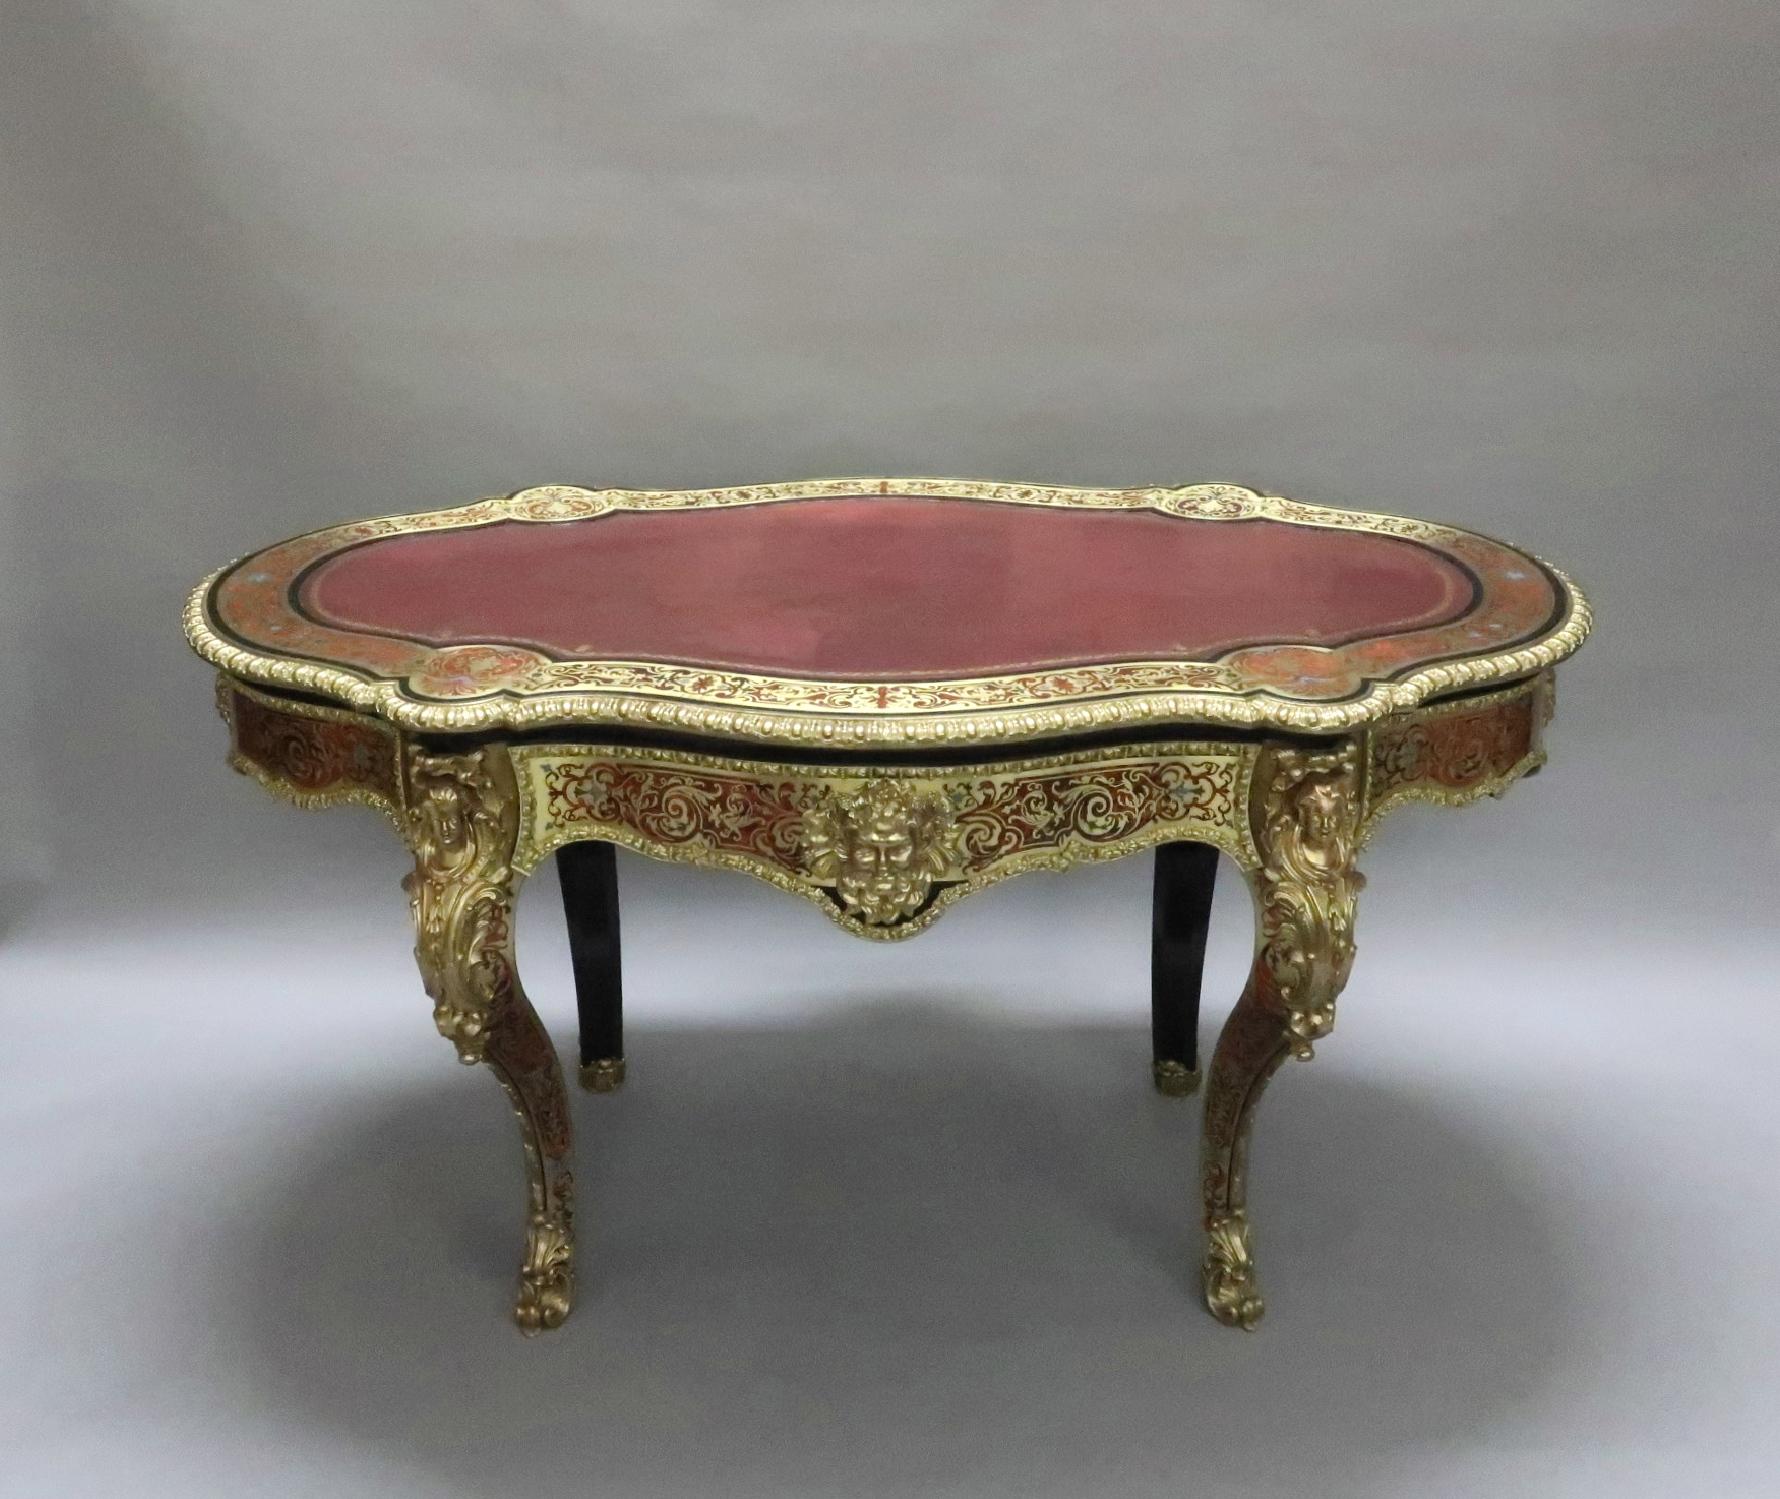 An outstanding exhibition quality freestanding Napoleon III Louis XV style serpentine shaped boulle engraved brass and red tortoiseshell writing table or centre table with blue and green colored enamel inlays. The table still retains its old maroon